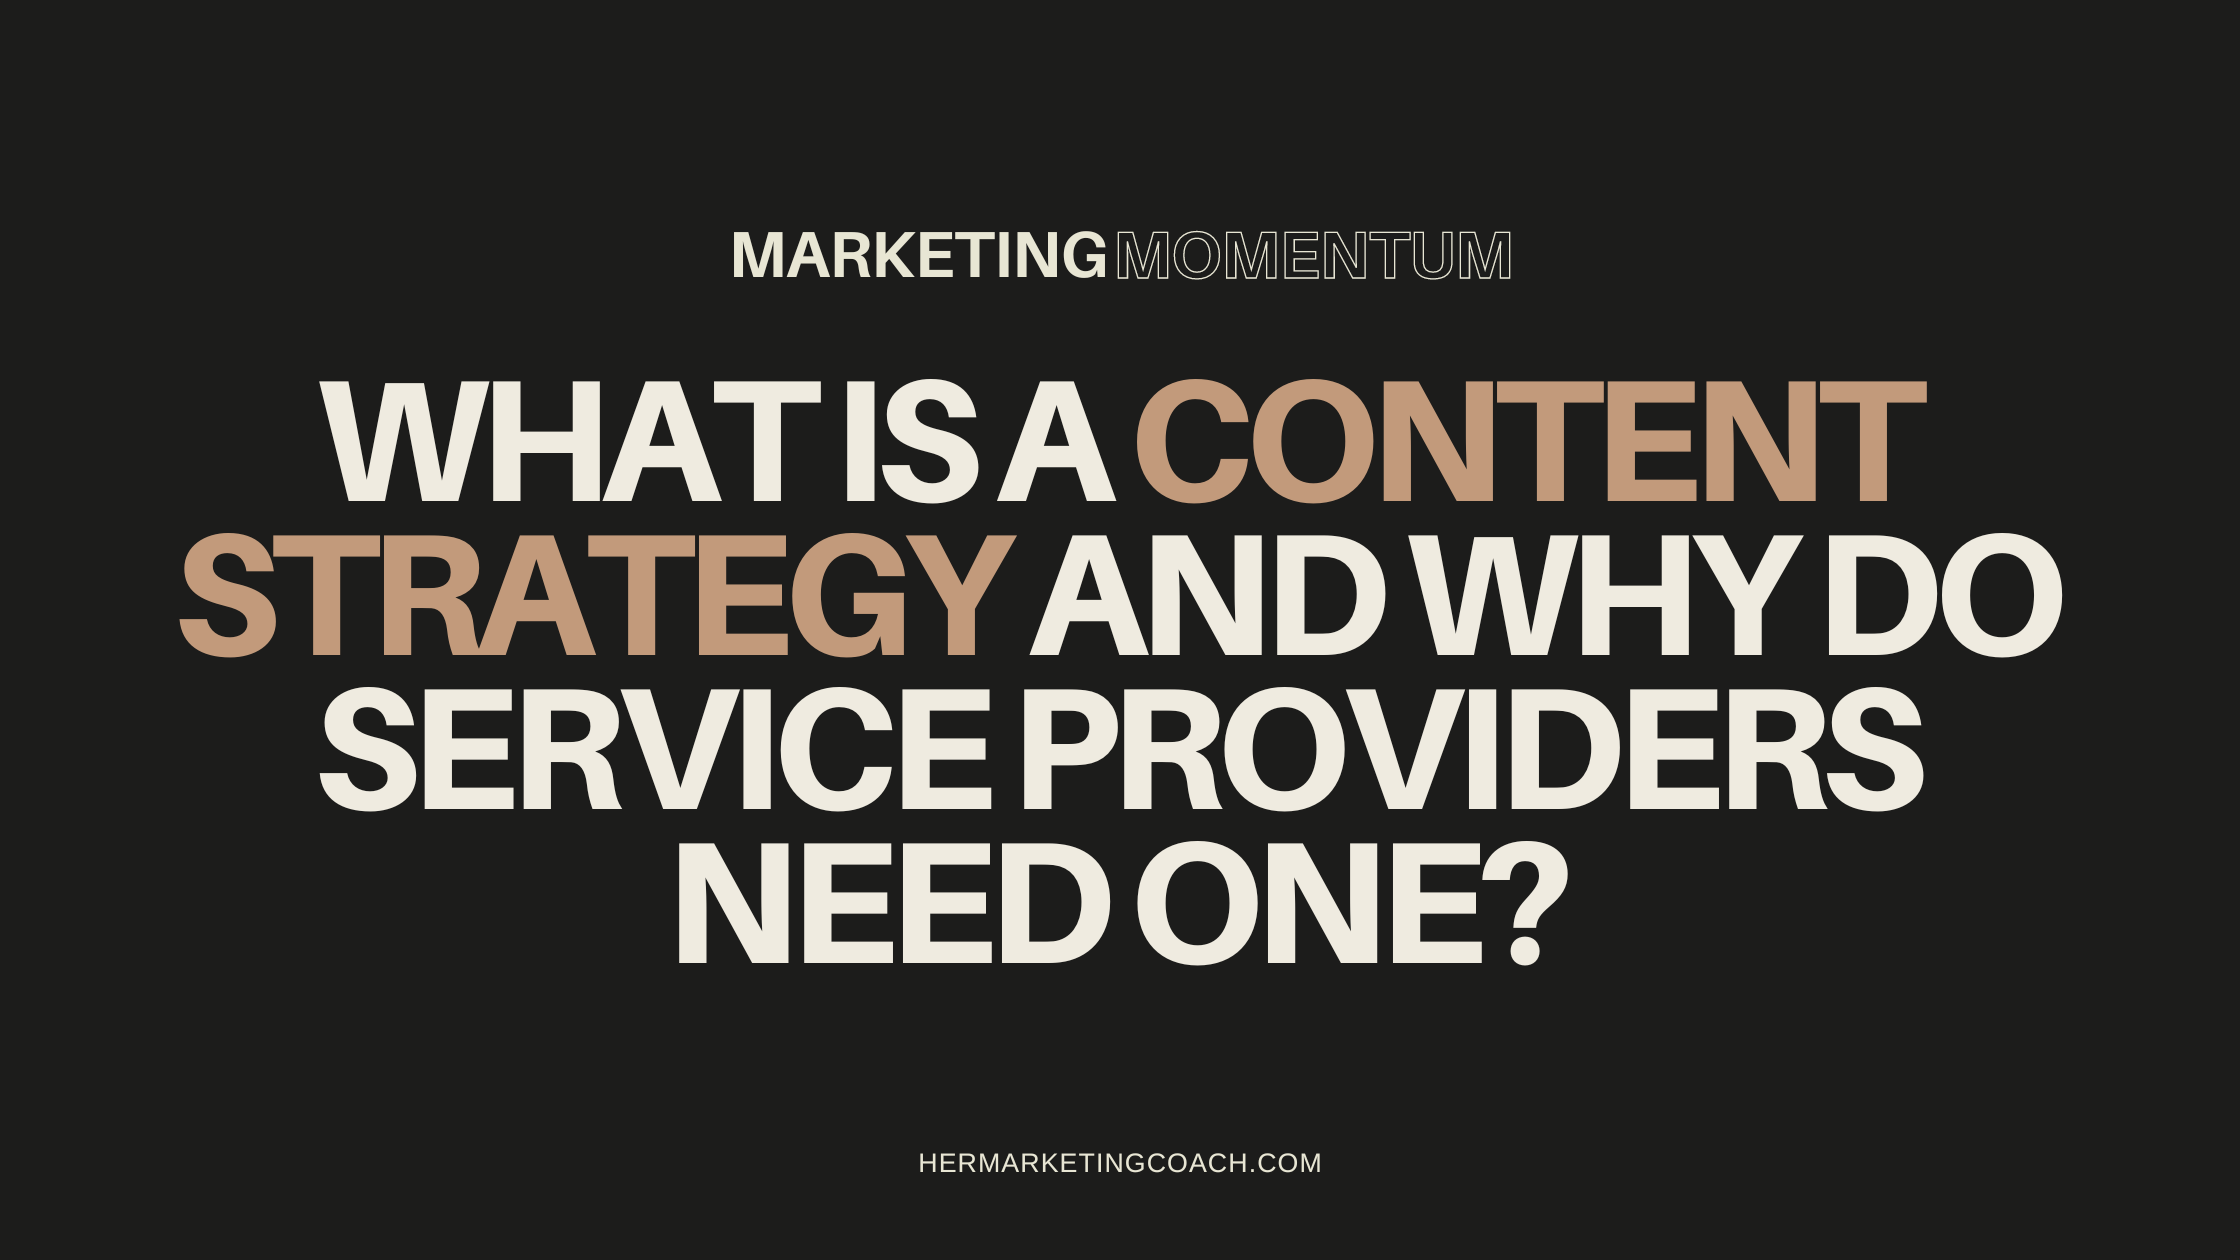 What Is A Content Strategy And Why Do Service Providers Need One?